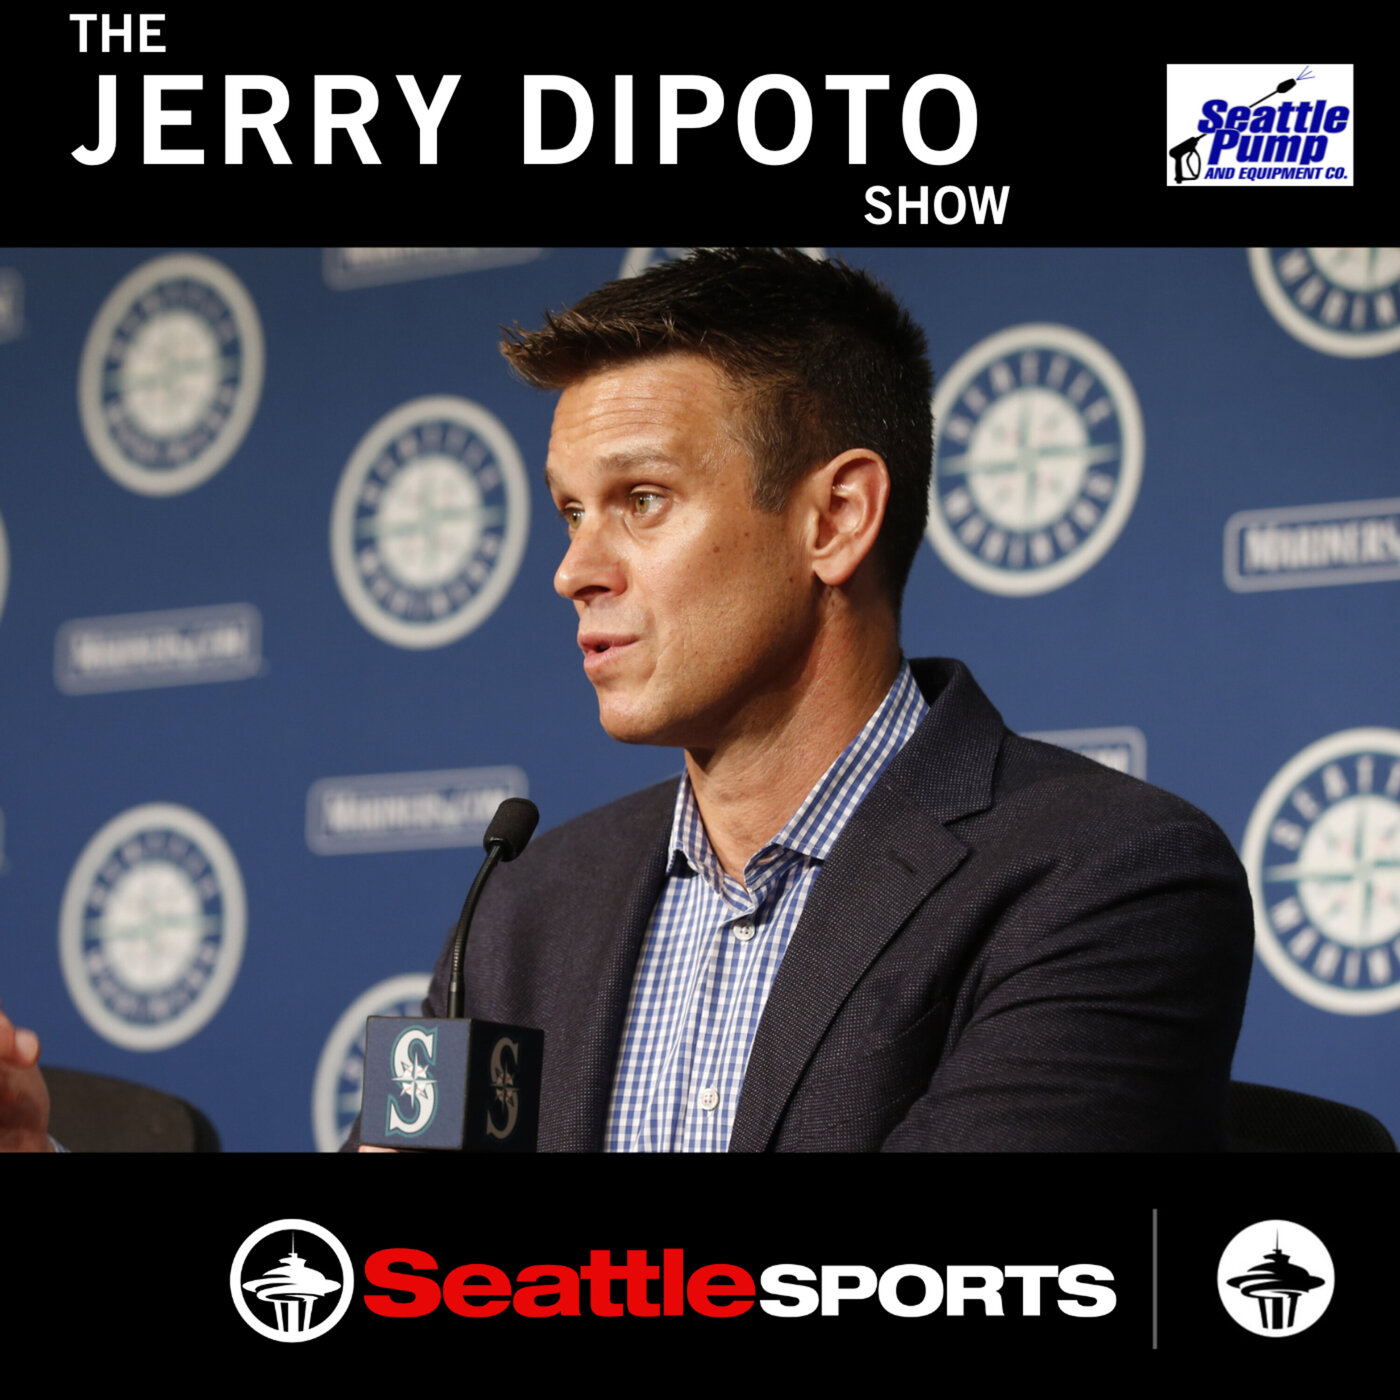 Jerry Dipoto-Jorge Polanco does all of the things we value very highly